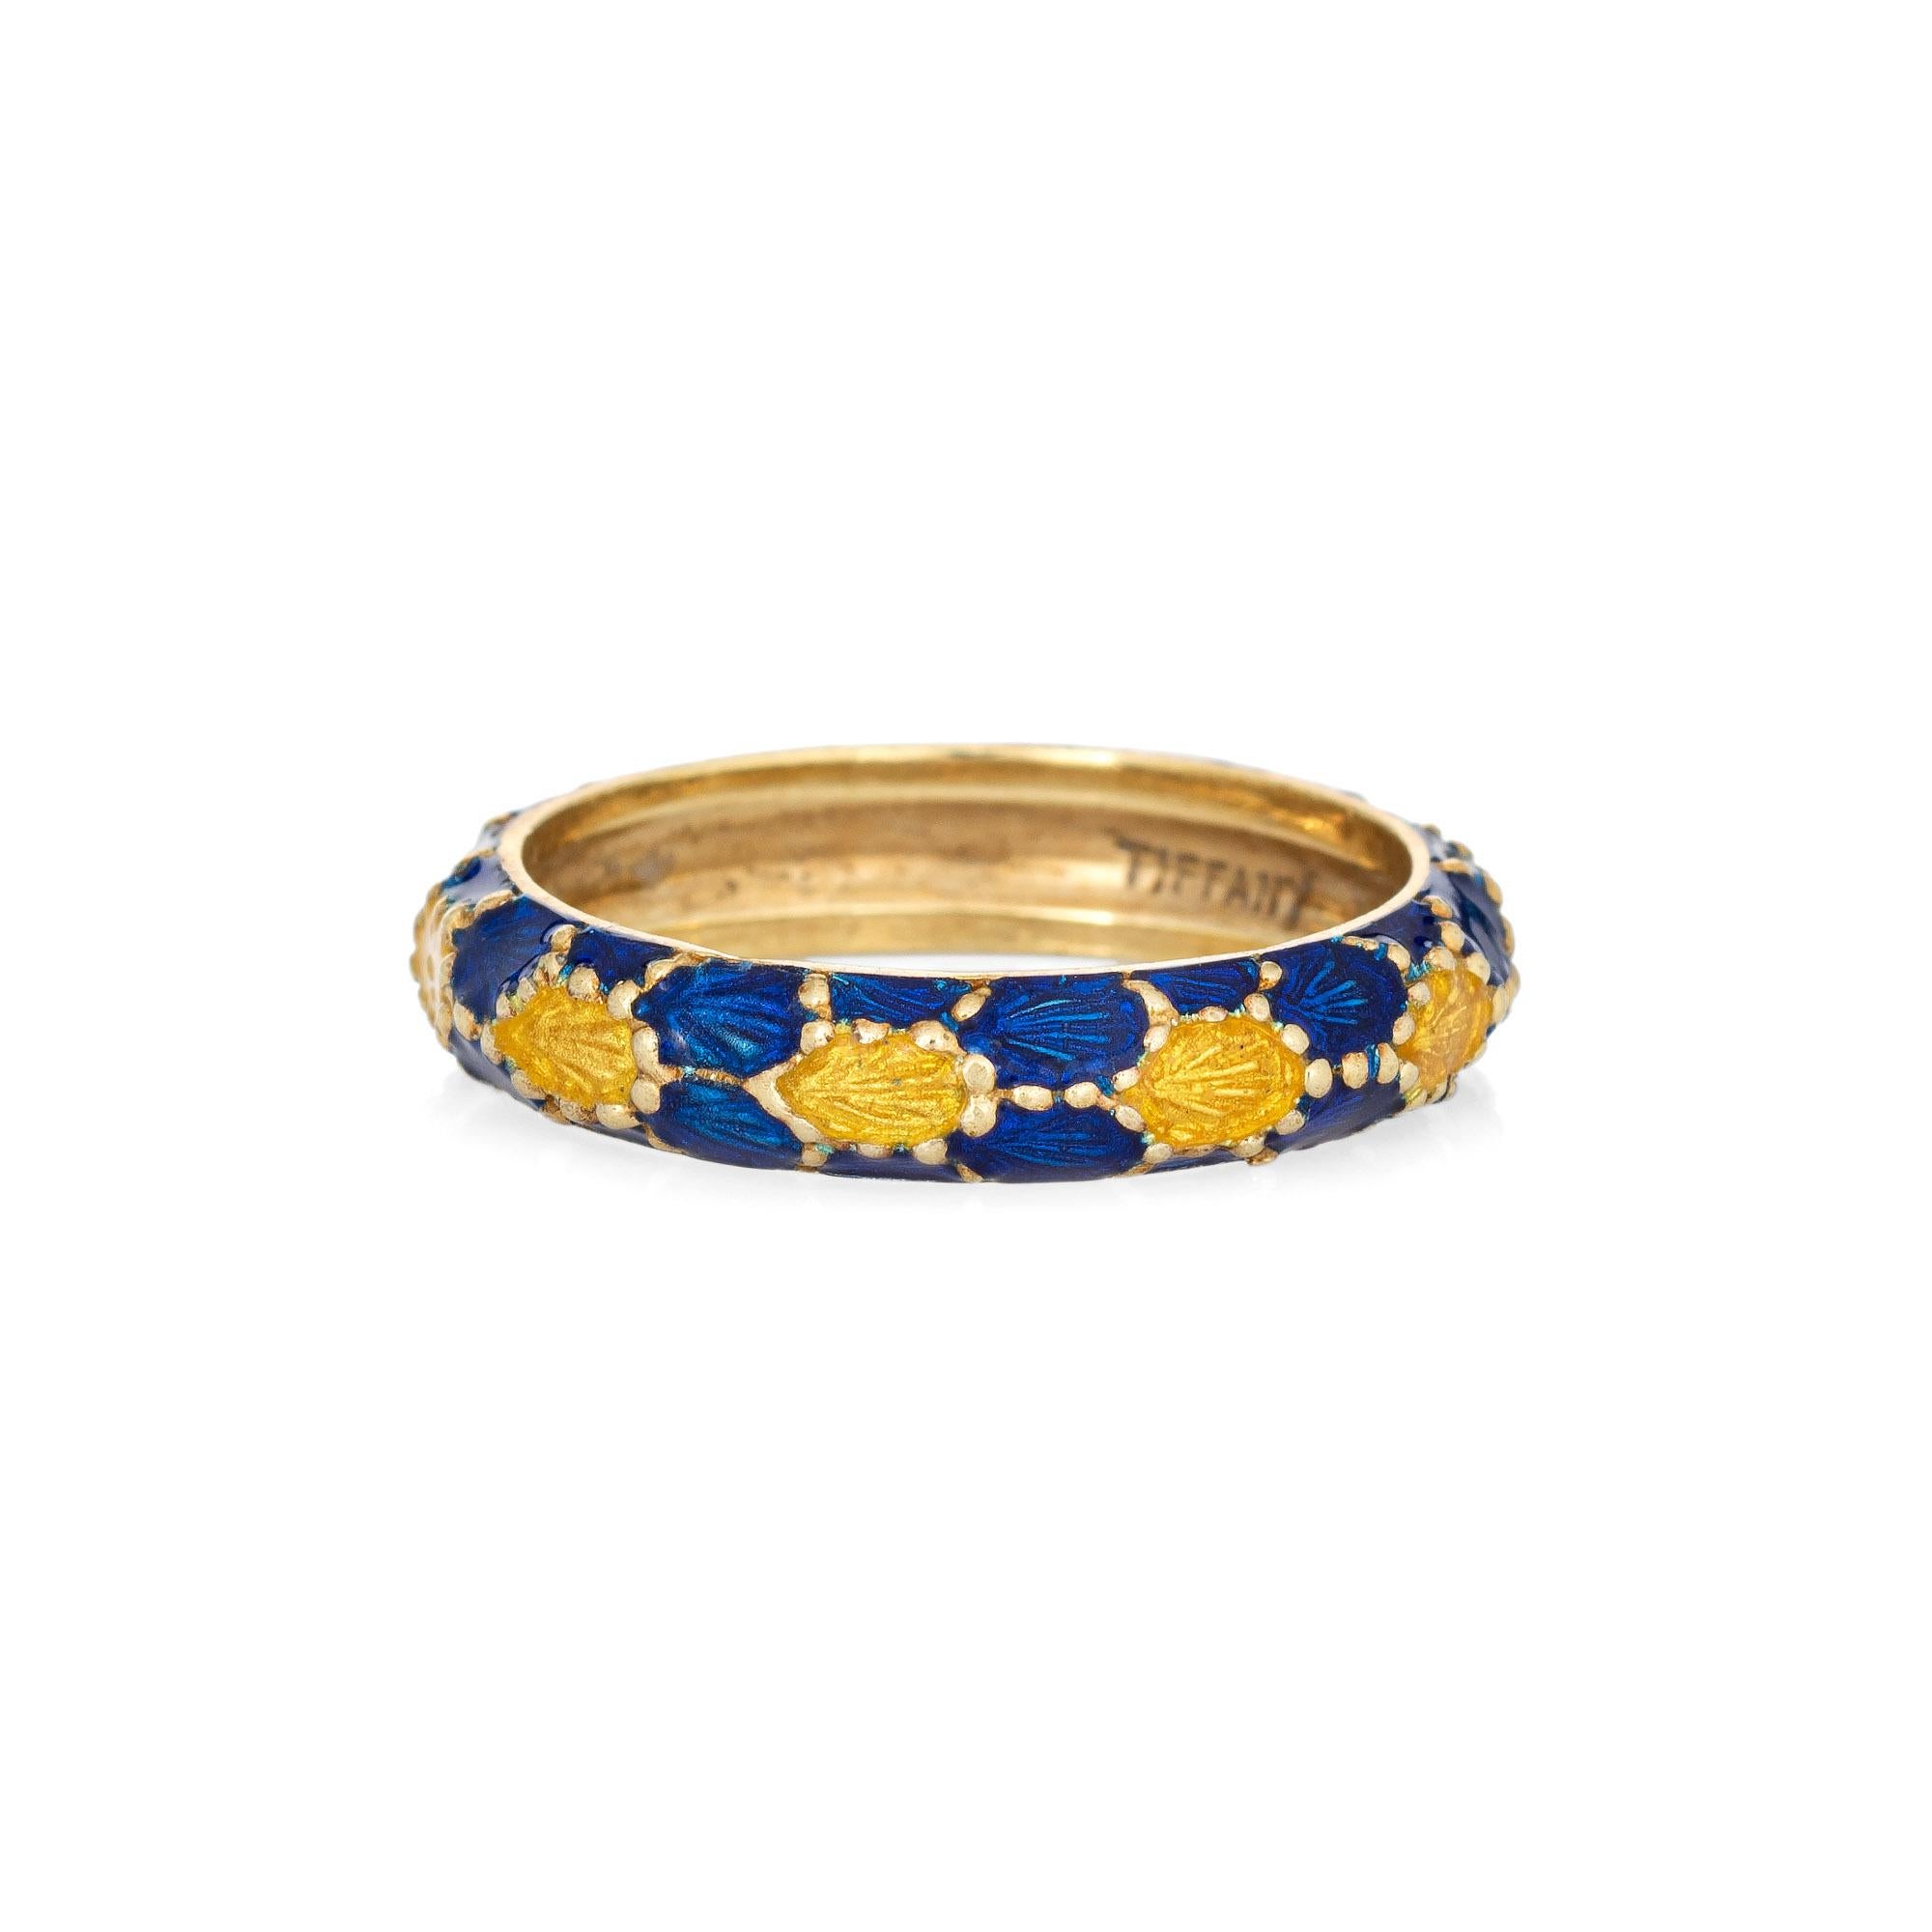 Vintage Tiffany & Co blue & yellow enamel ring crafted in 18 karat yellow gold (circa 1980s).  

Vibrant blue & yellow enameled panels are continuous around the band for a seamless look. The enamel is in good condition and free or cracks or chips.